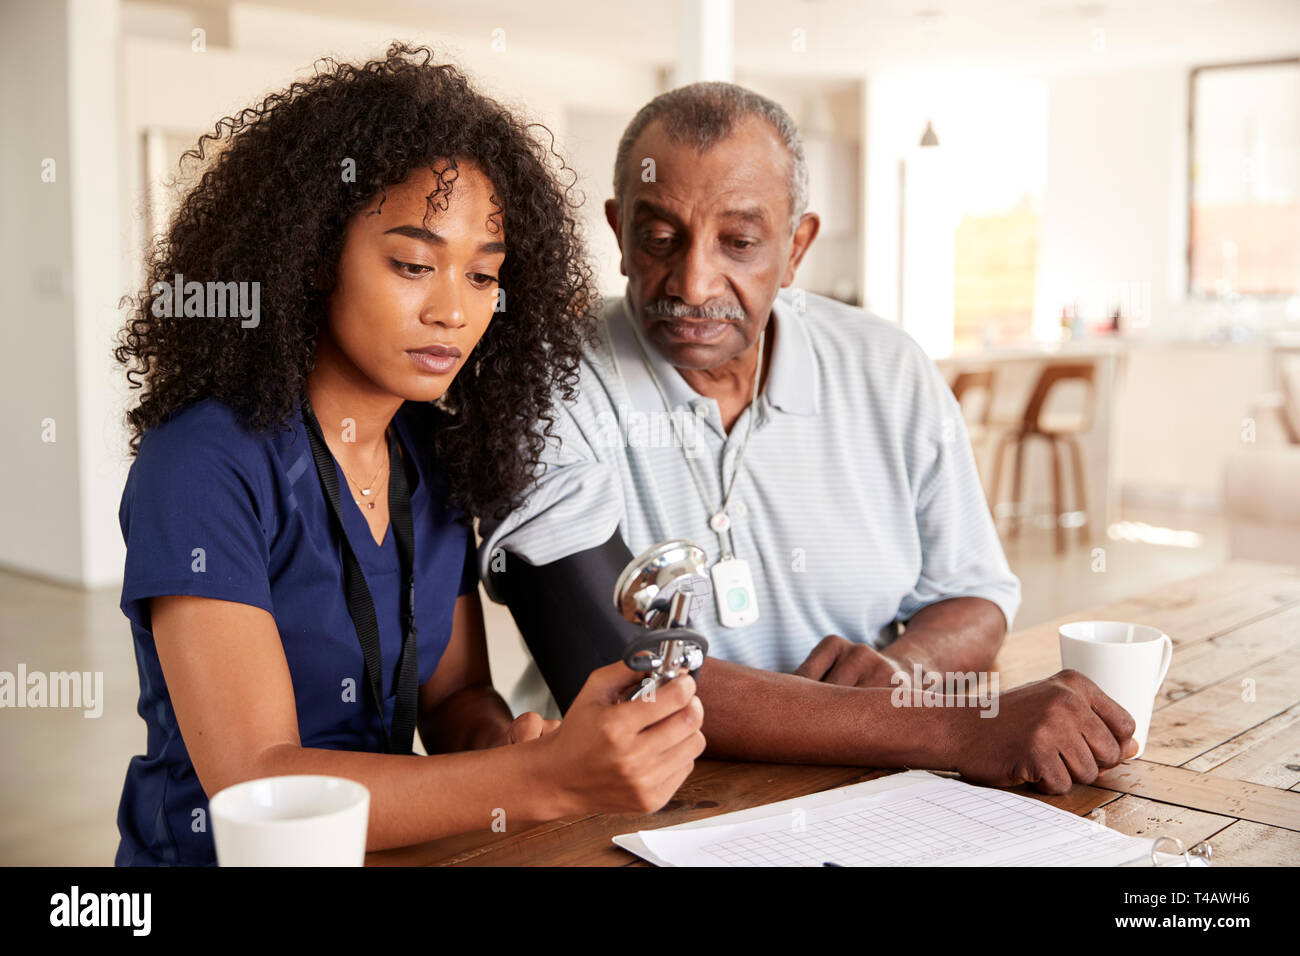 Female healthcare worker checking the blood pressure of a senior man during a home visit Stock Photo